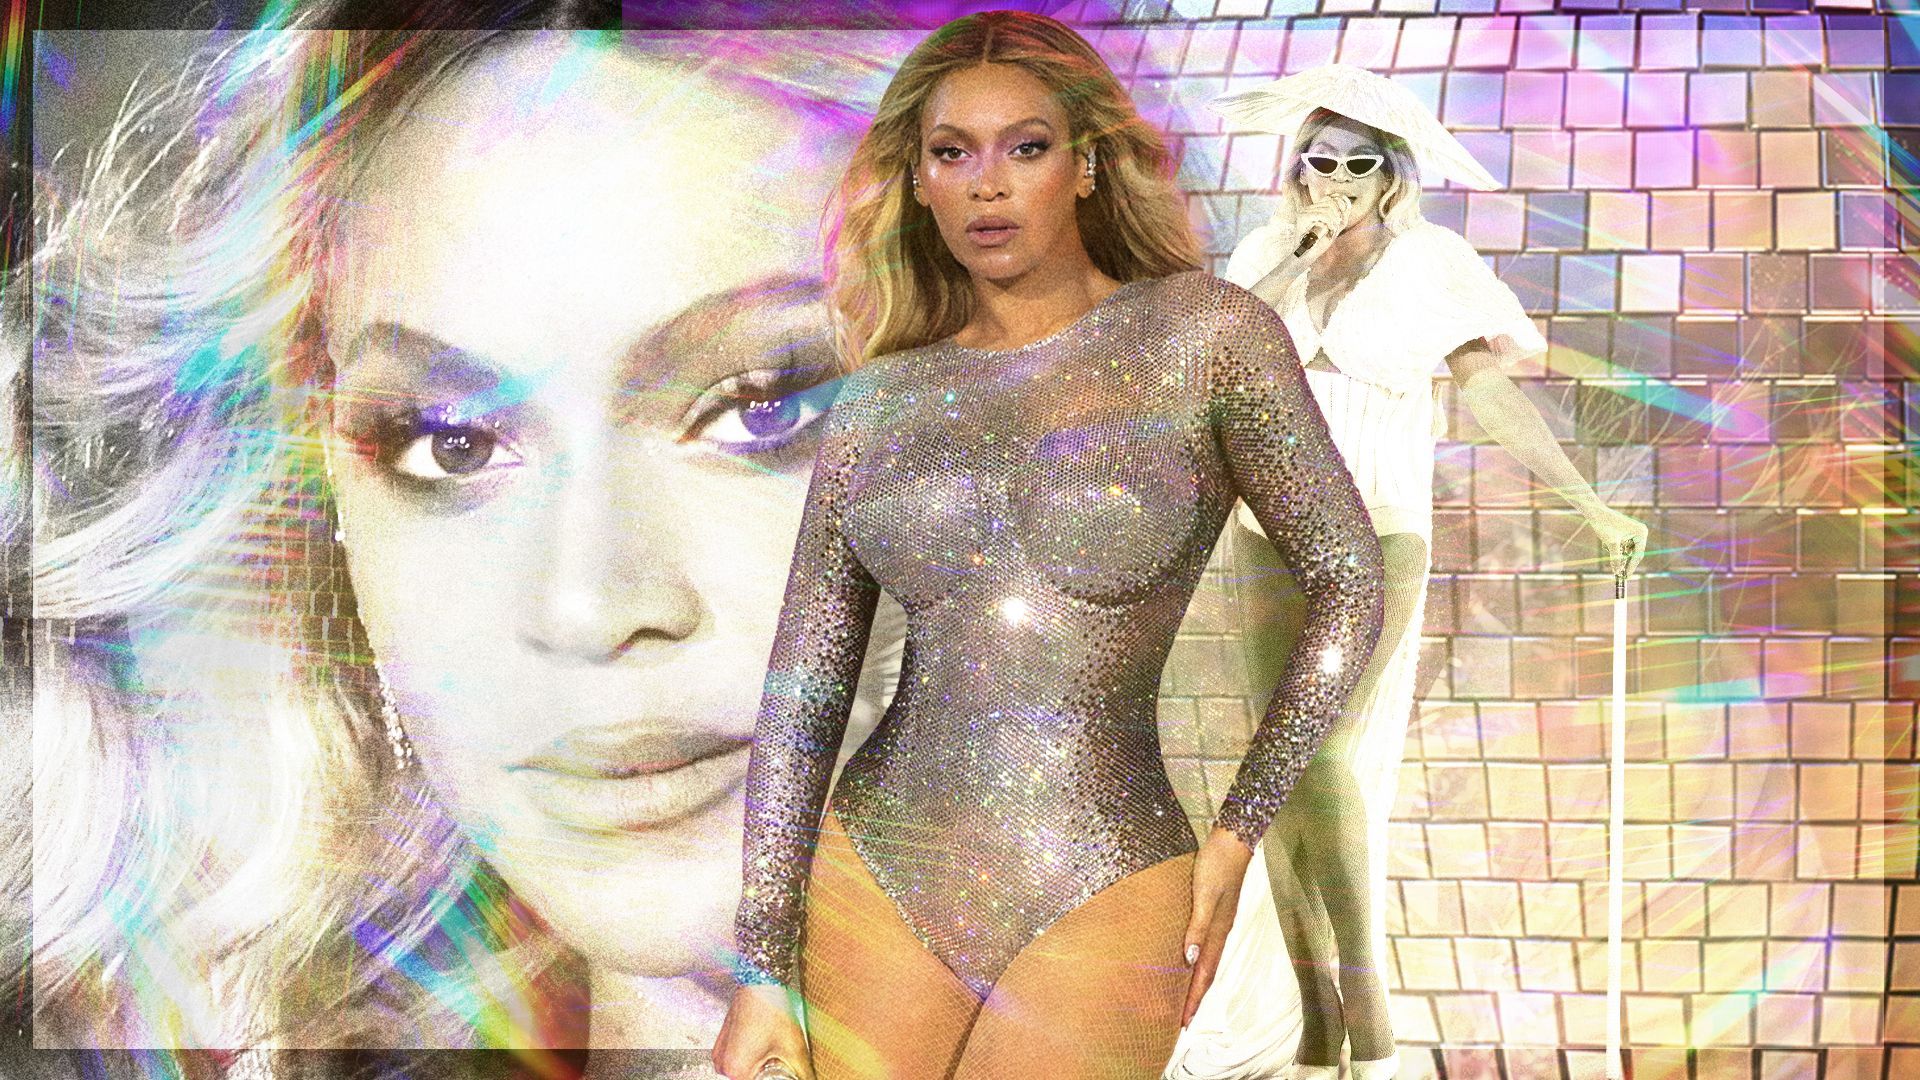 Photo Illustration of Beyonce photos from the Renaissance tour layered atop disco ball imagery